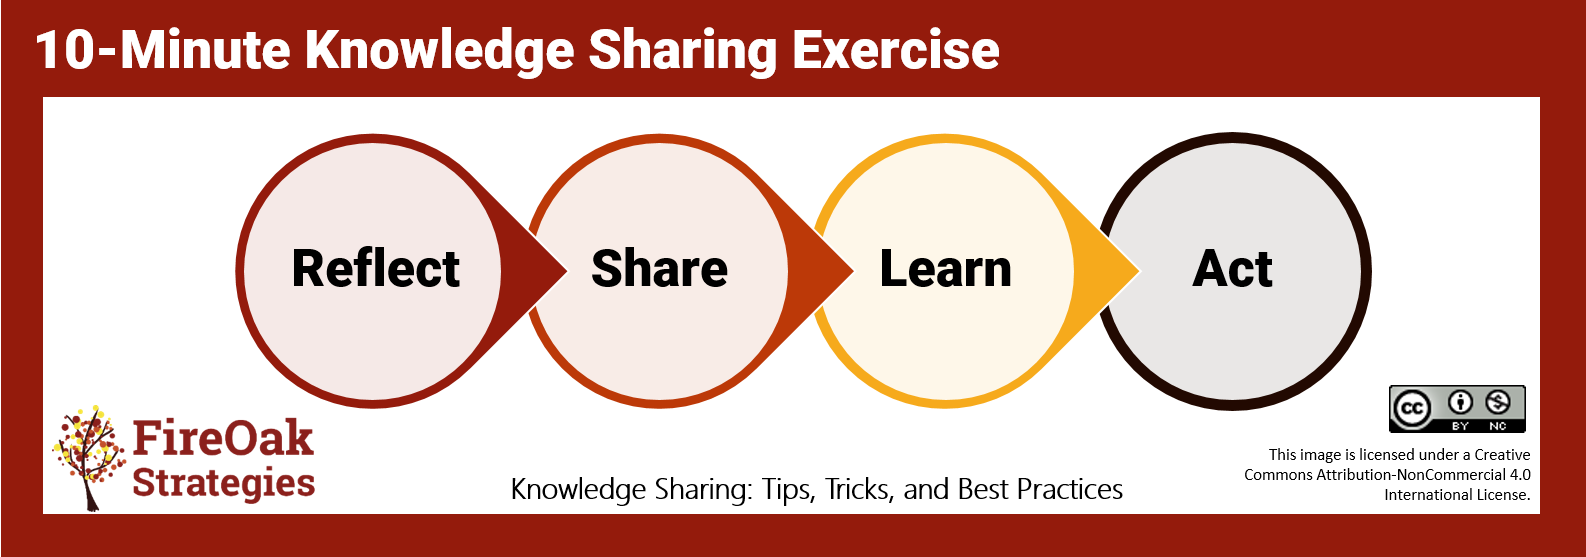 10 Minute Knowledge Sharing Exercise